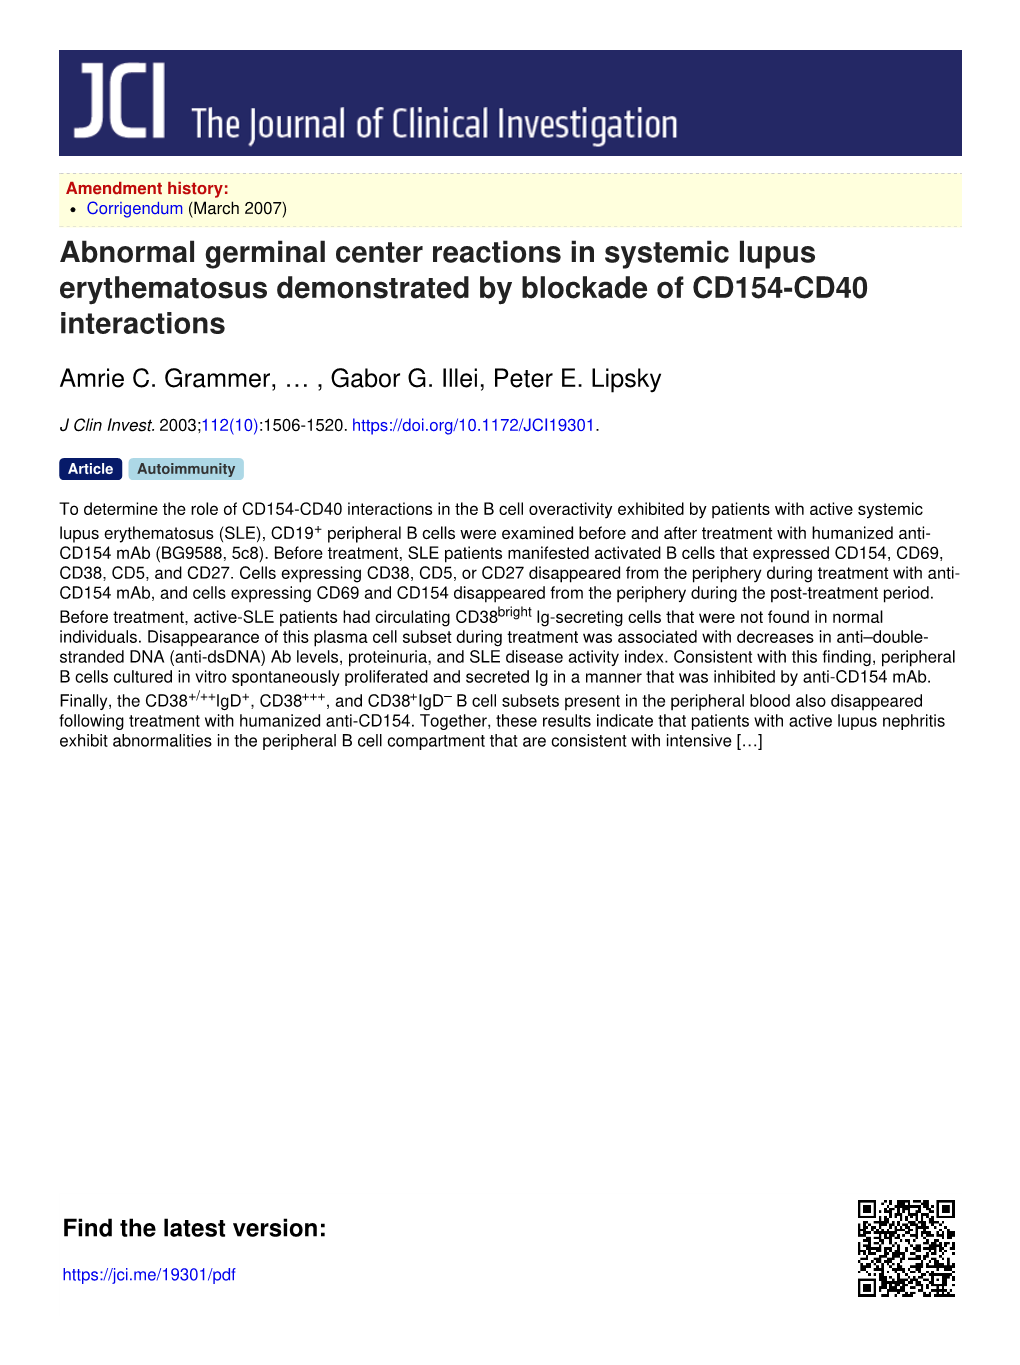 Abnormal Germinal Center Reactions in Systemic Lupus Erythematosus Demonstrated by Blockade of CD154-CD40 Interactions